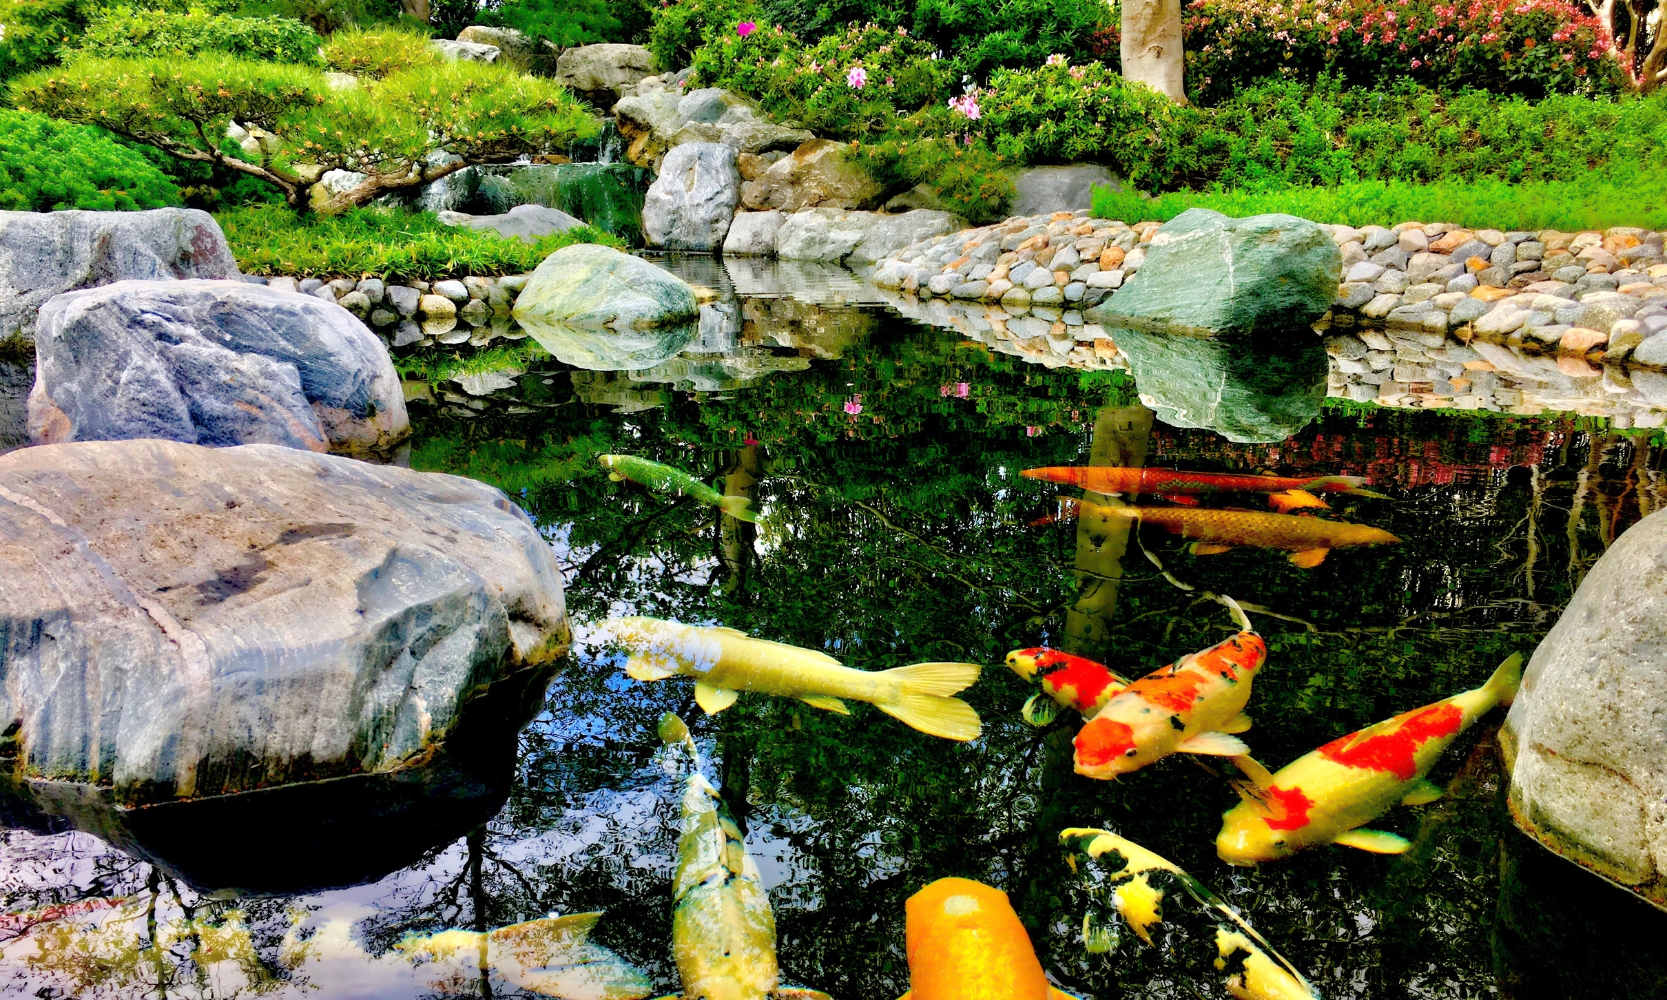 An image of a Japanese garden with a koi fish pond